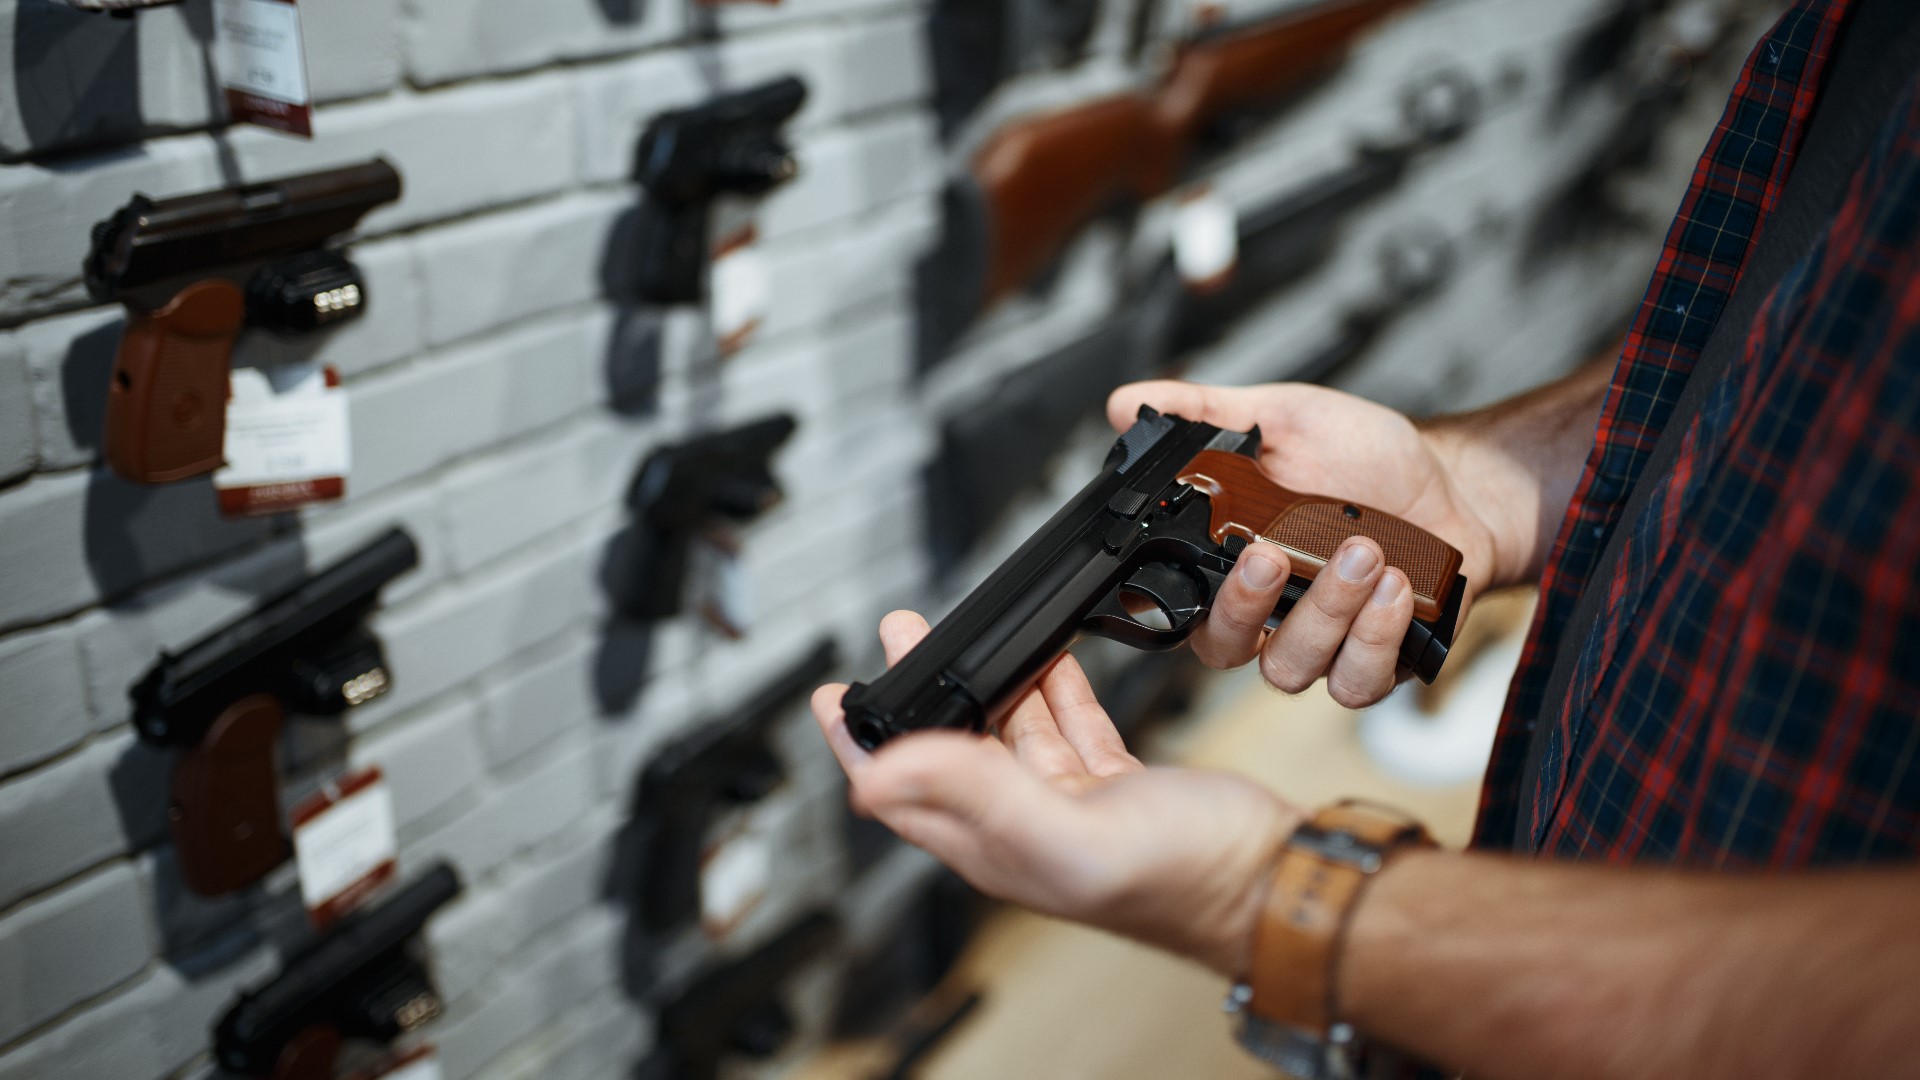 The Gaston County Sheriff's Office said pistol purchase permits spiked by more than 9,000 between 2019 and 2020.